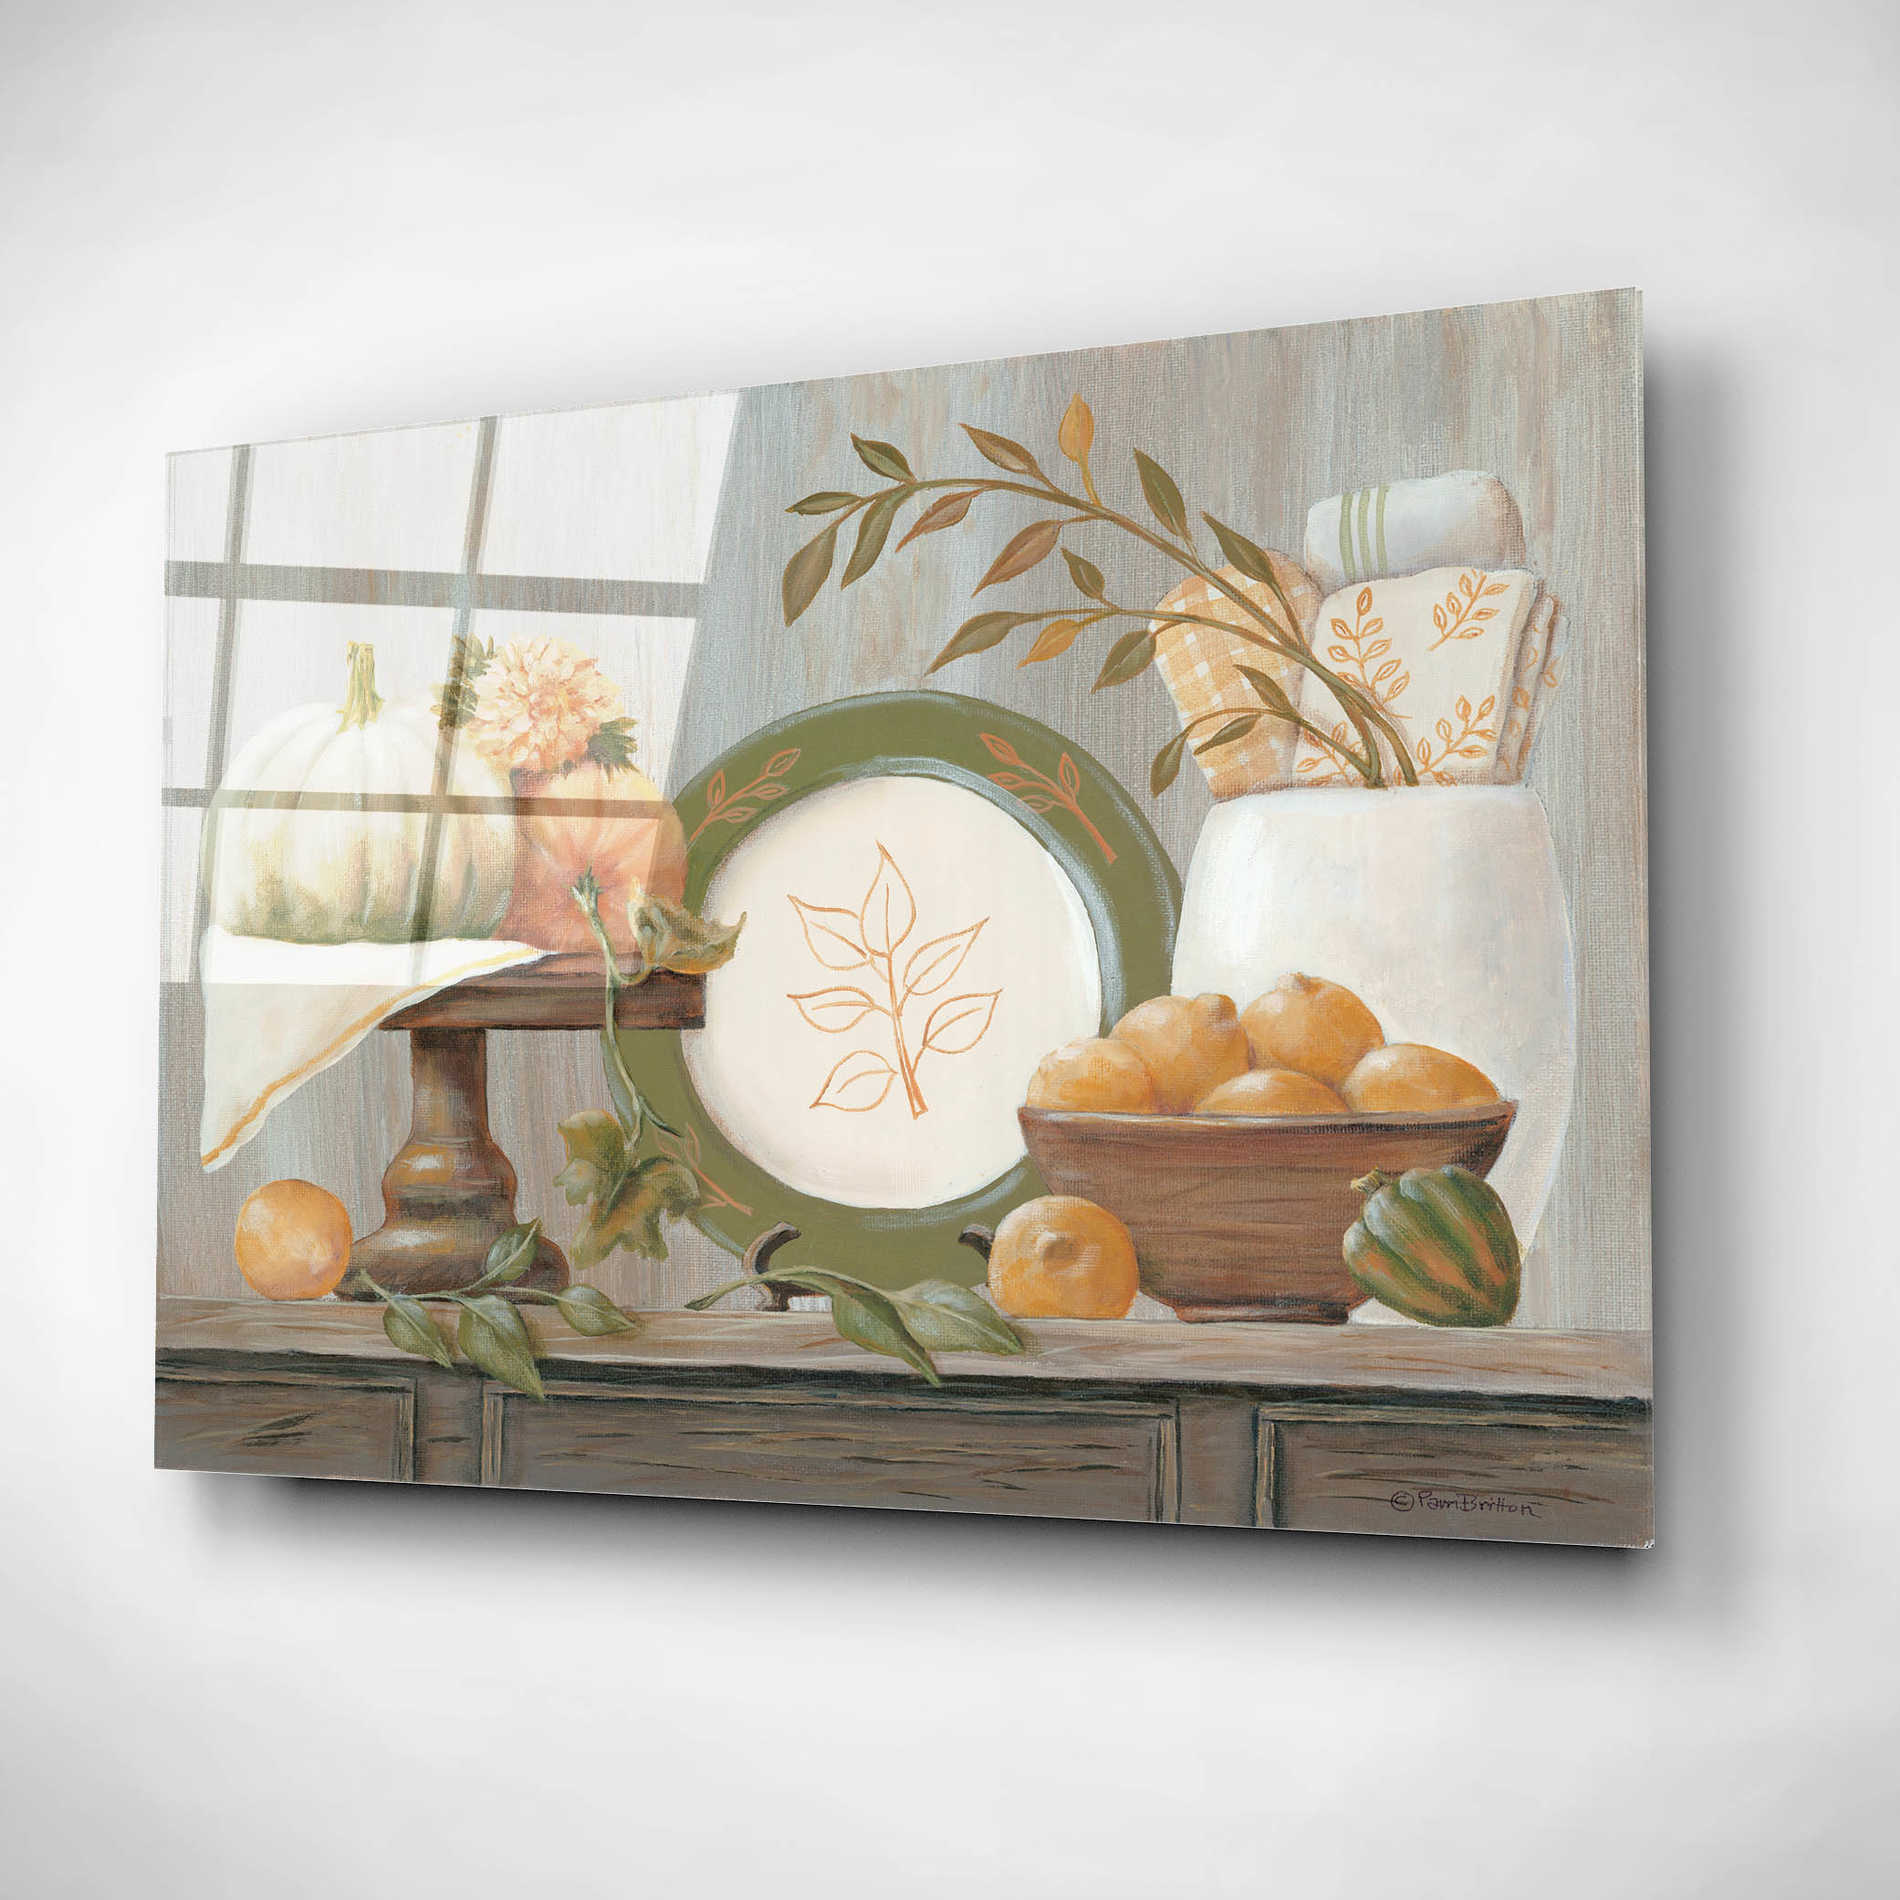 Epic Art 'A Harvest Kitchen' by Pam Britton, Acrylic Glass Wall Art,24x16